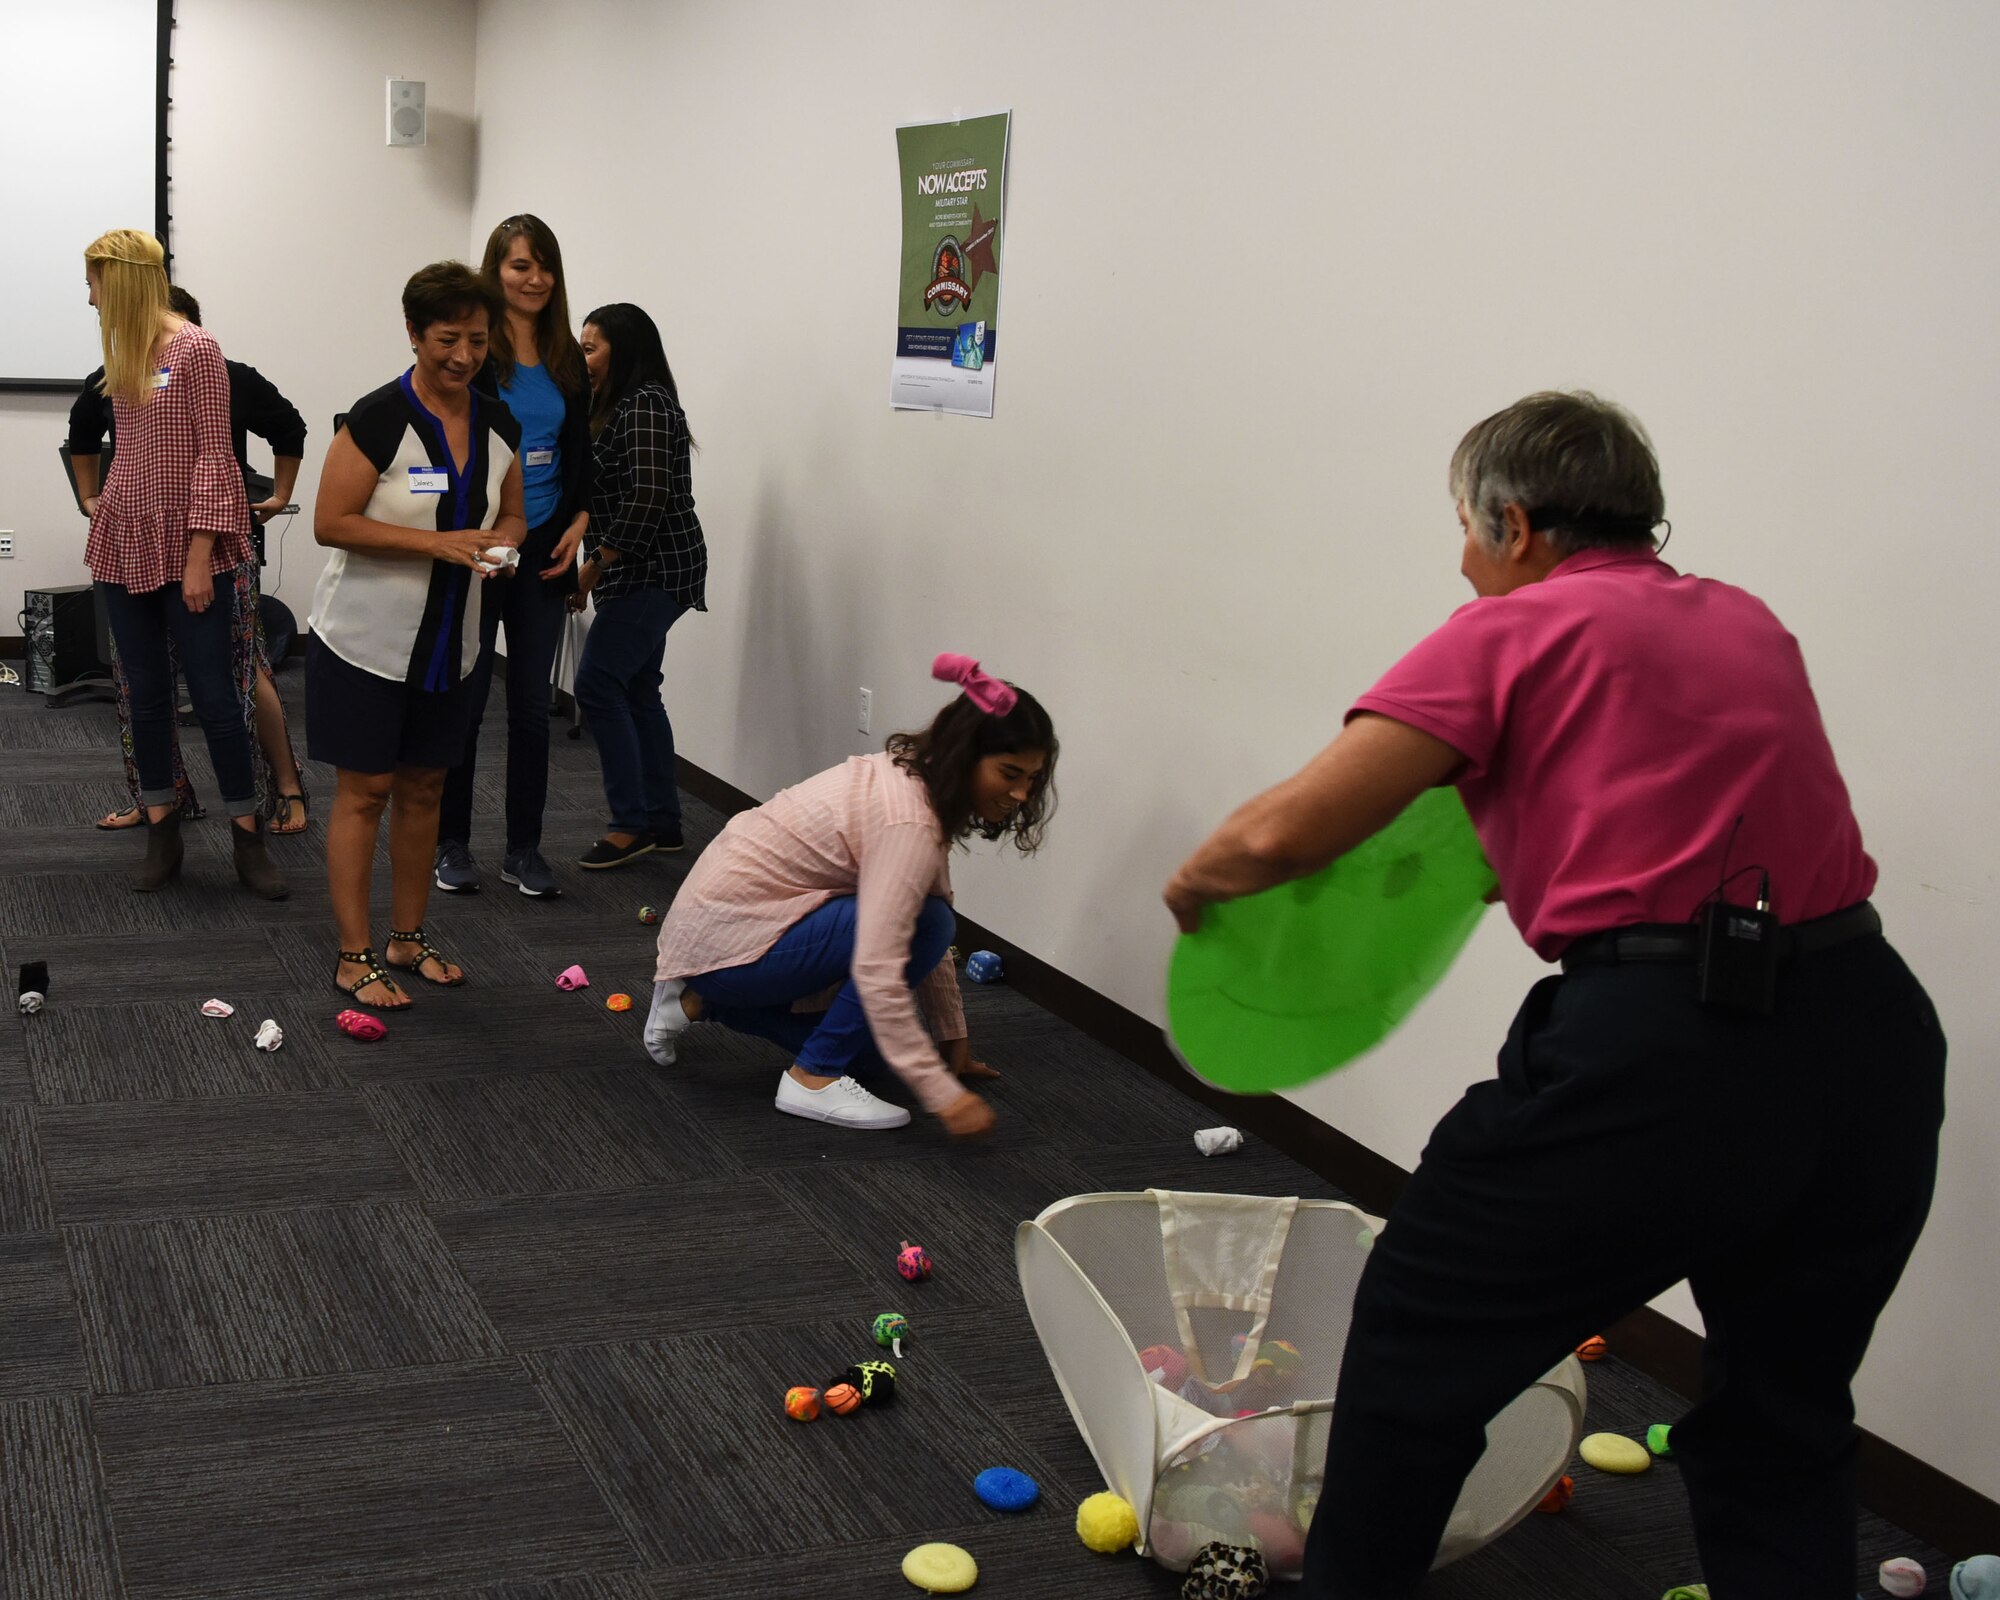 Seminar attendees participate in a clean-up activity led by Dr. Diane H. Craft, a physical education professor, Sept. 5, 2018 at Luke Air Force Base, Ariz.